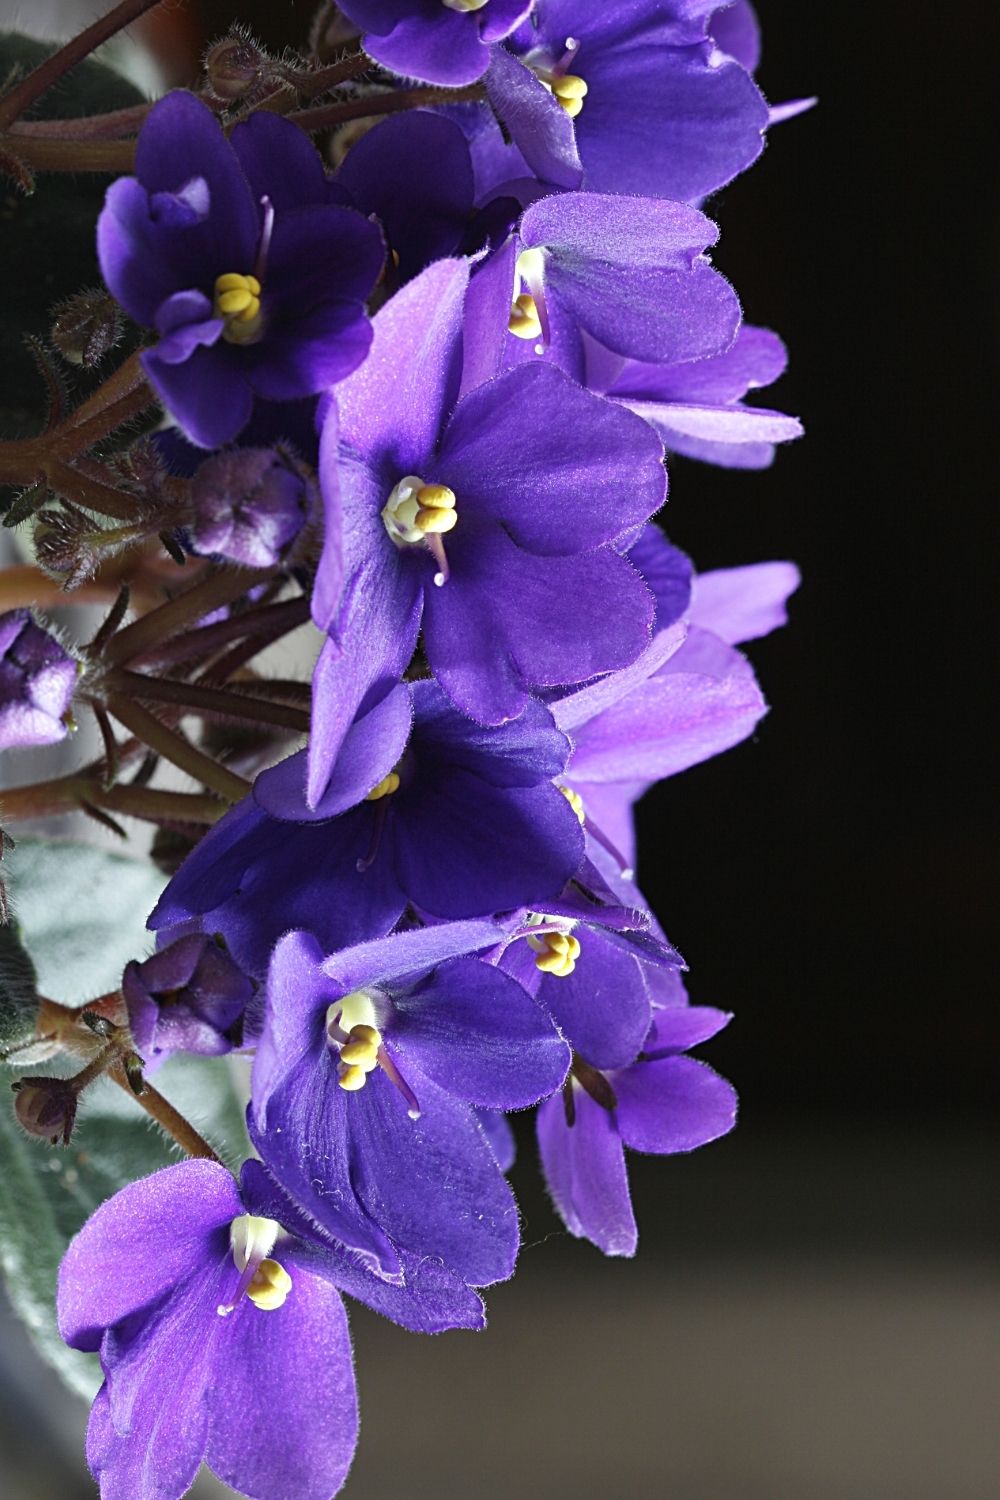 African violet will thrive in a terrarium as it requires hot, damp, and moist atmosphere to survive